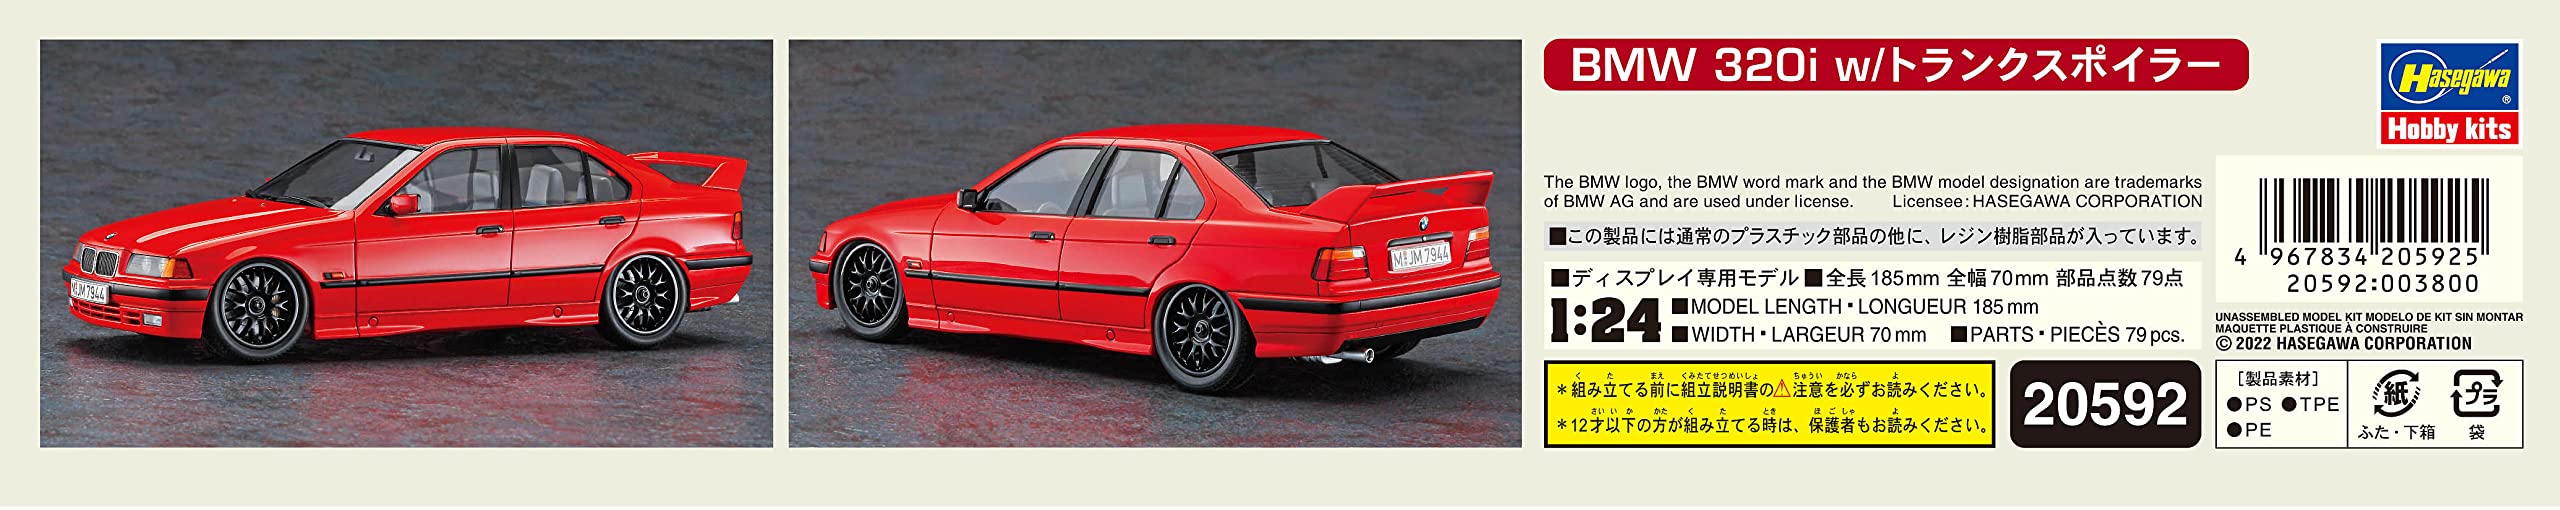 Hasegawa 1/24 scale BMW 320i with TRUNK SPOILER Plastic Model kit 20592 NEW_8